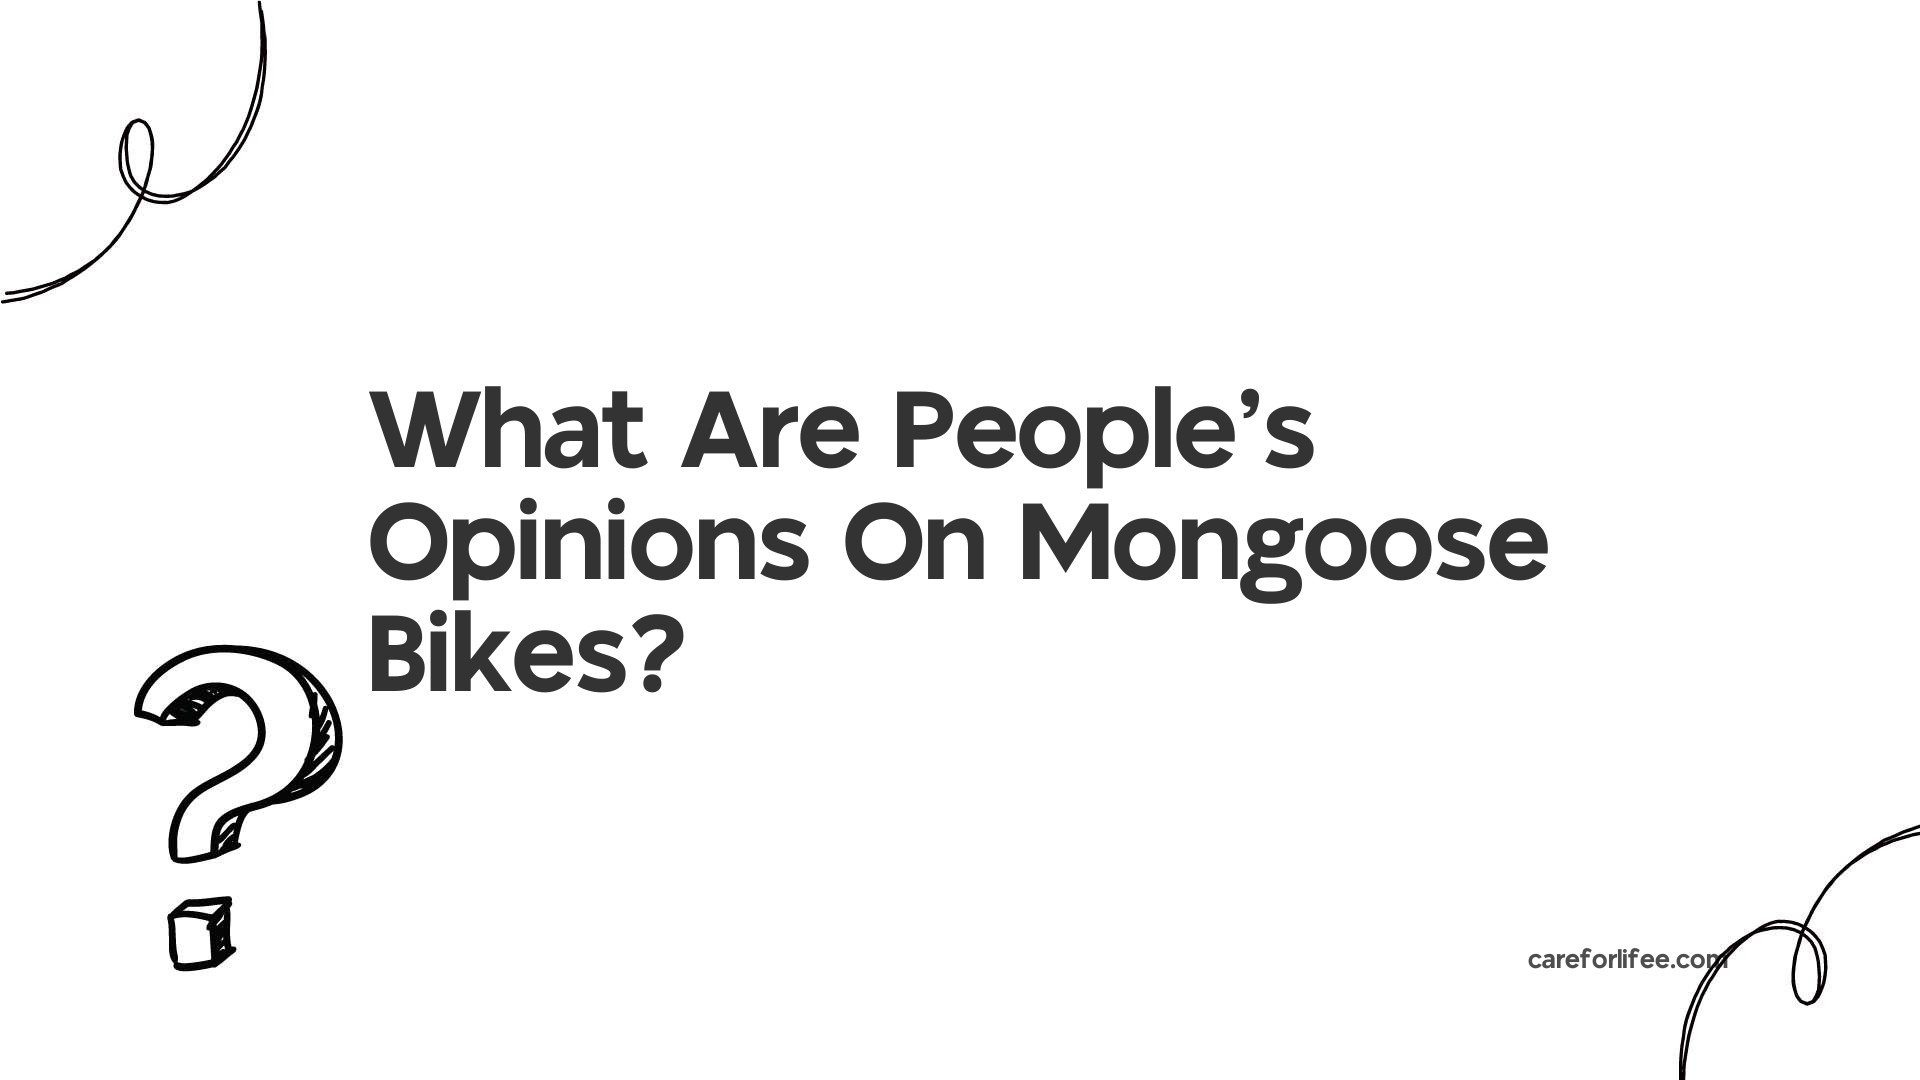 What Are People's Opinions On Mongoose Bikes?